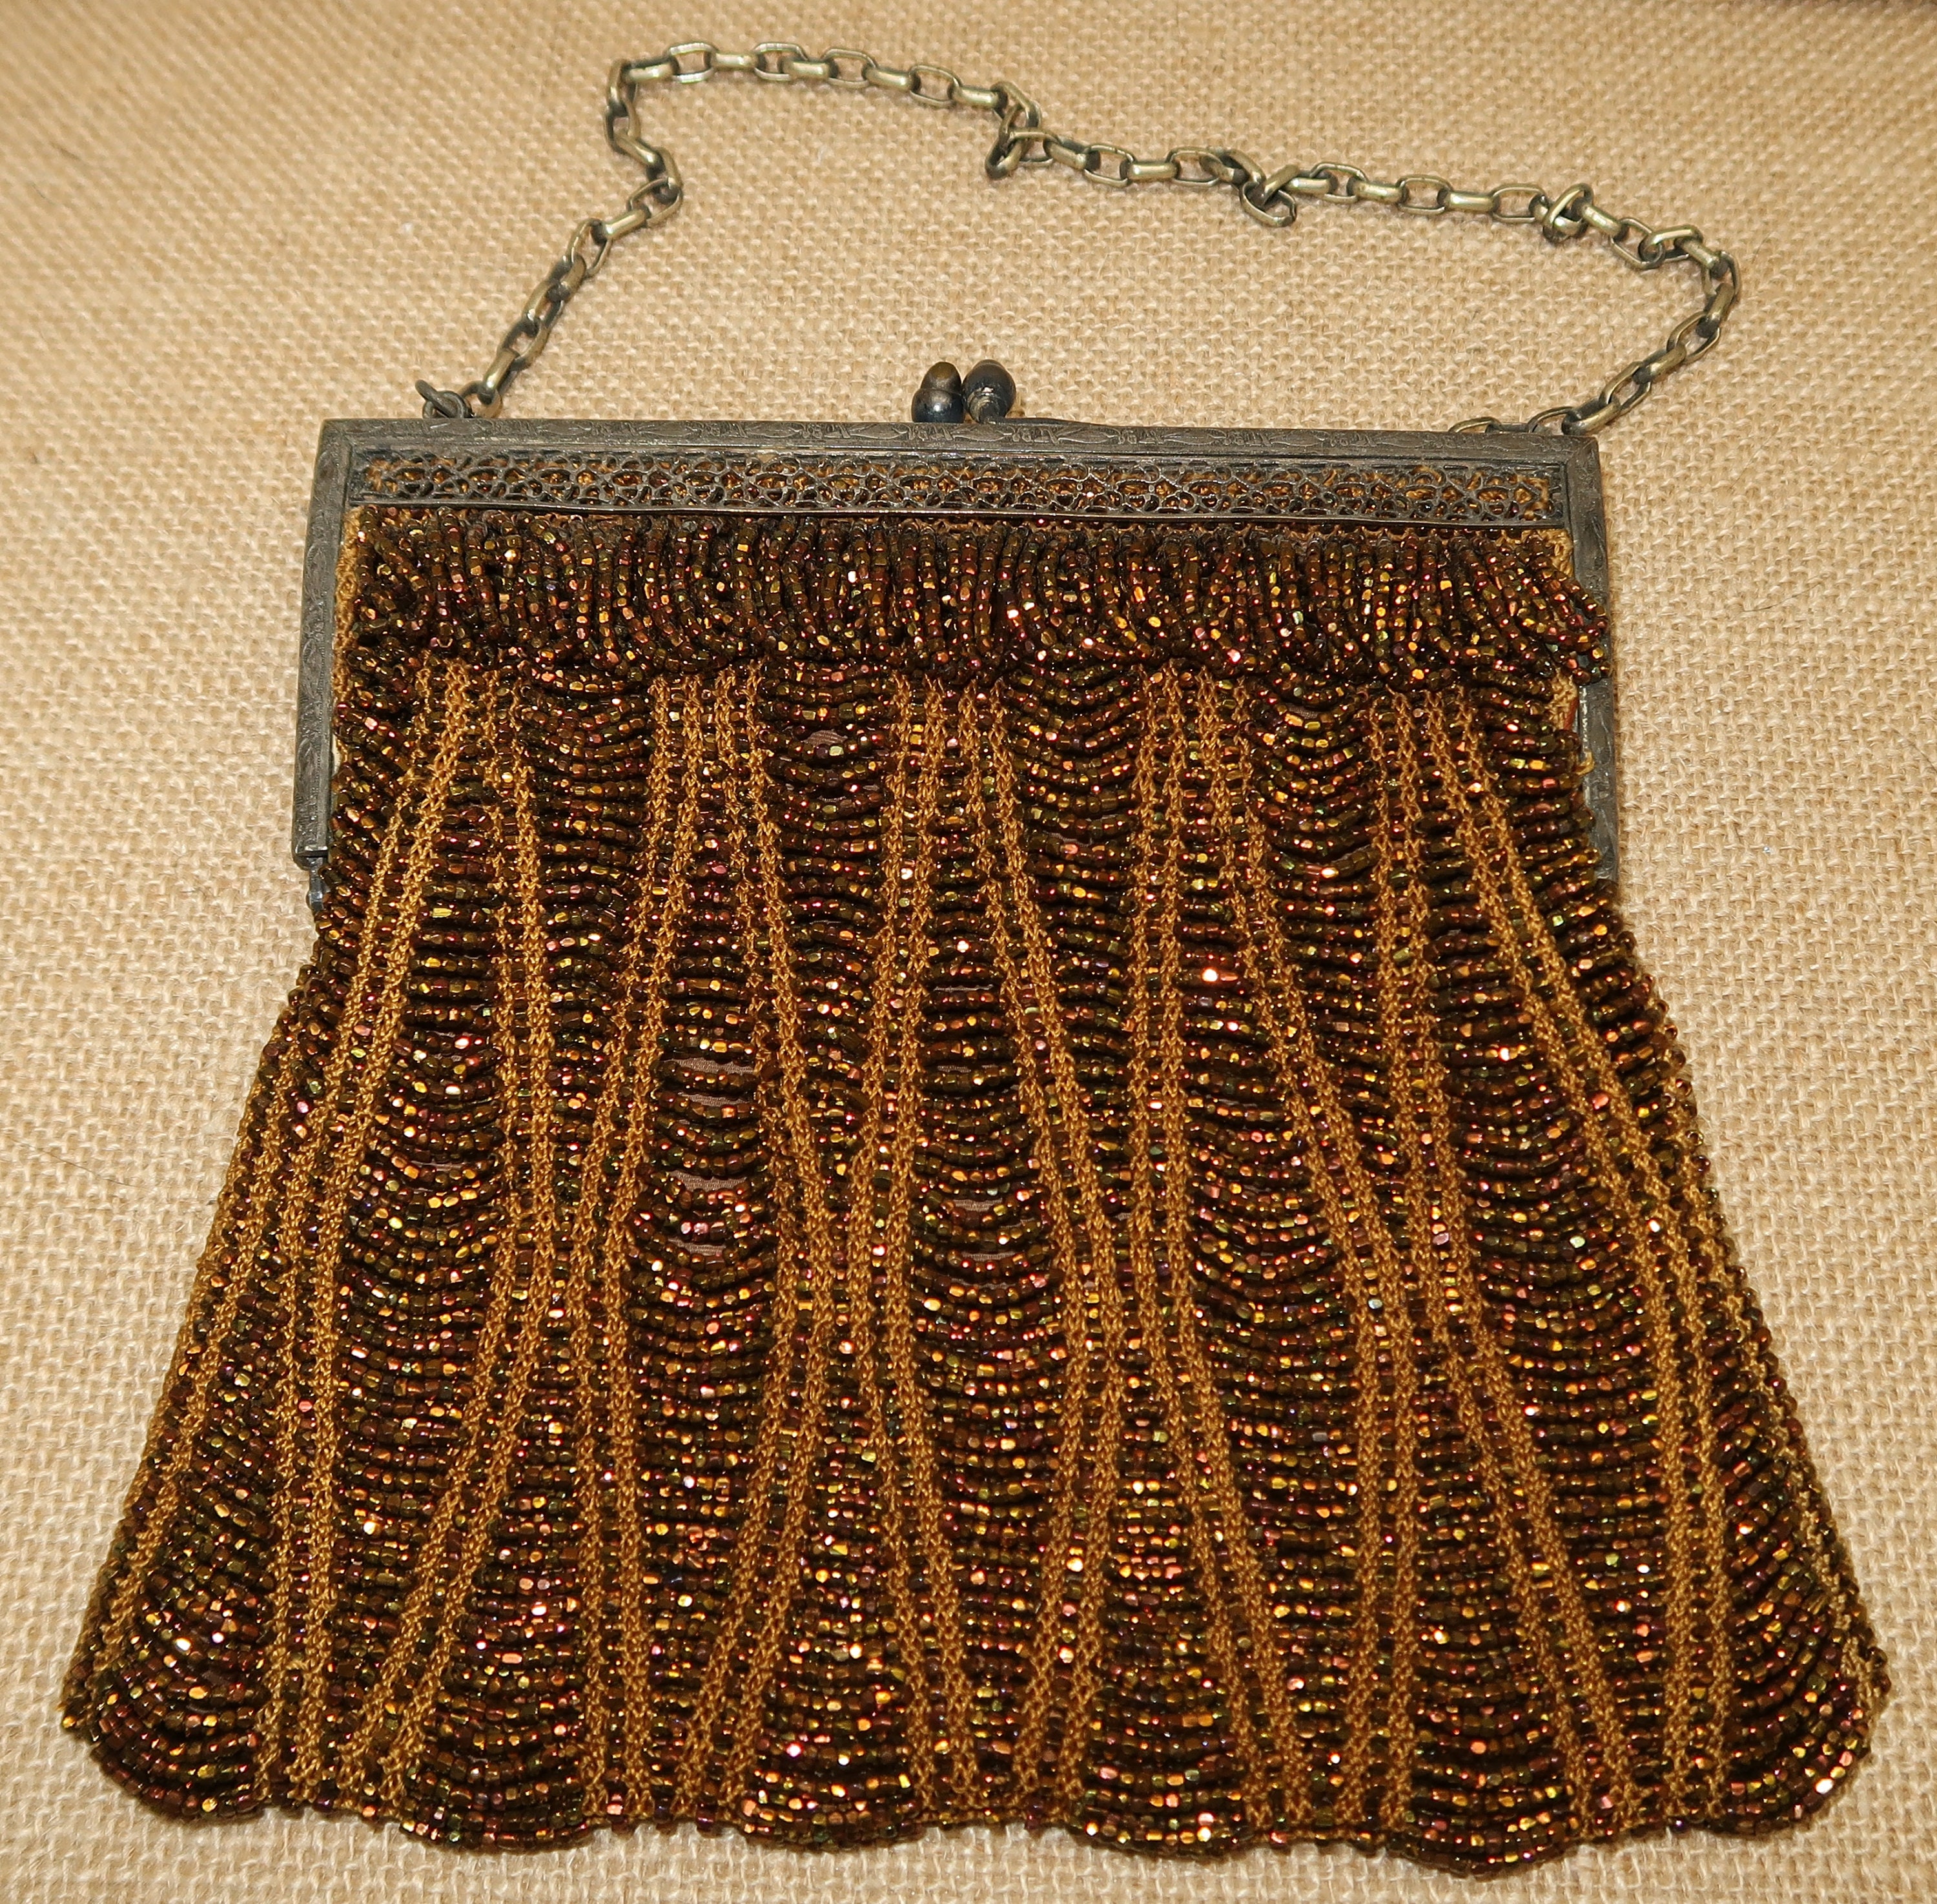 Antique French Lush Fringed Glass Bead Flapper Purse, Paisley Evening Bag, Gold, Silver 12.5 Long